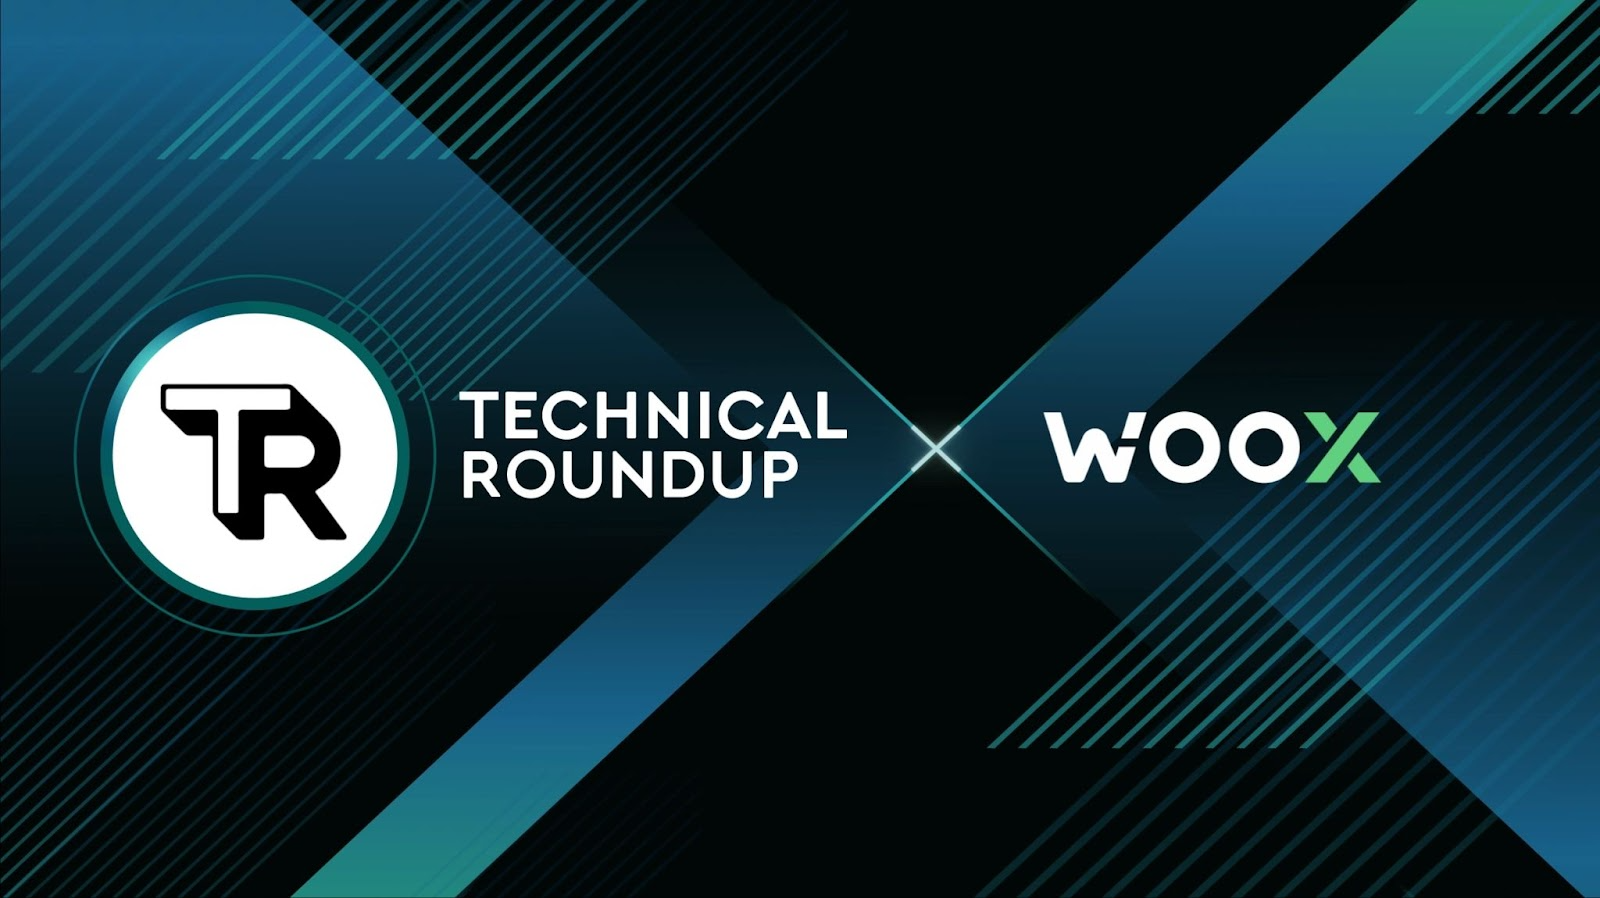 WOO X partners with TechnicalRoundup for product ambassadorship and user growth